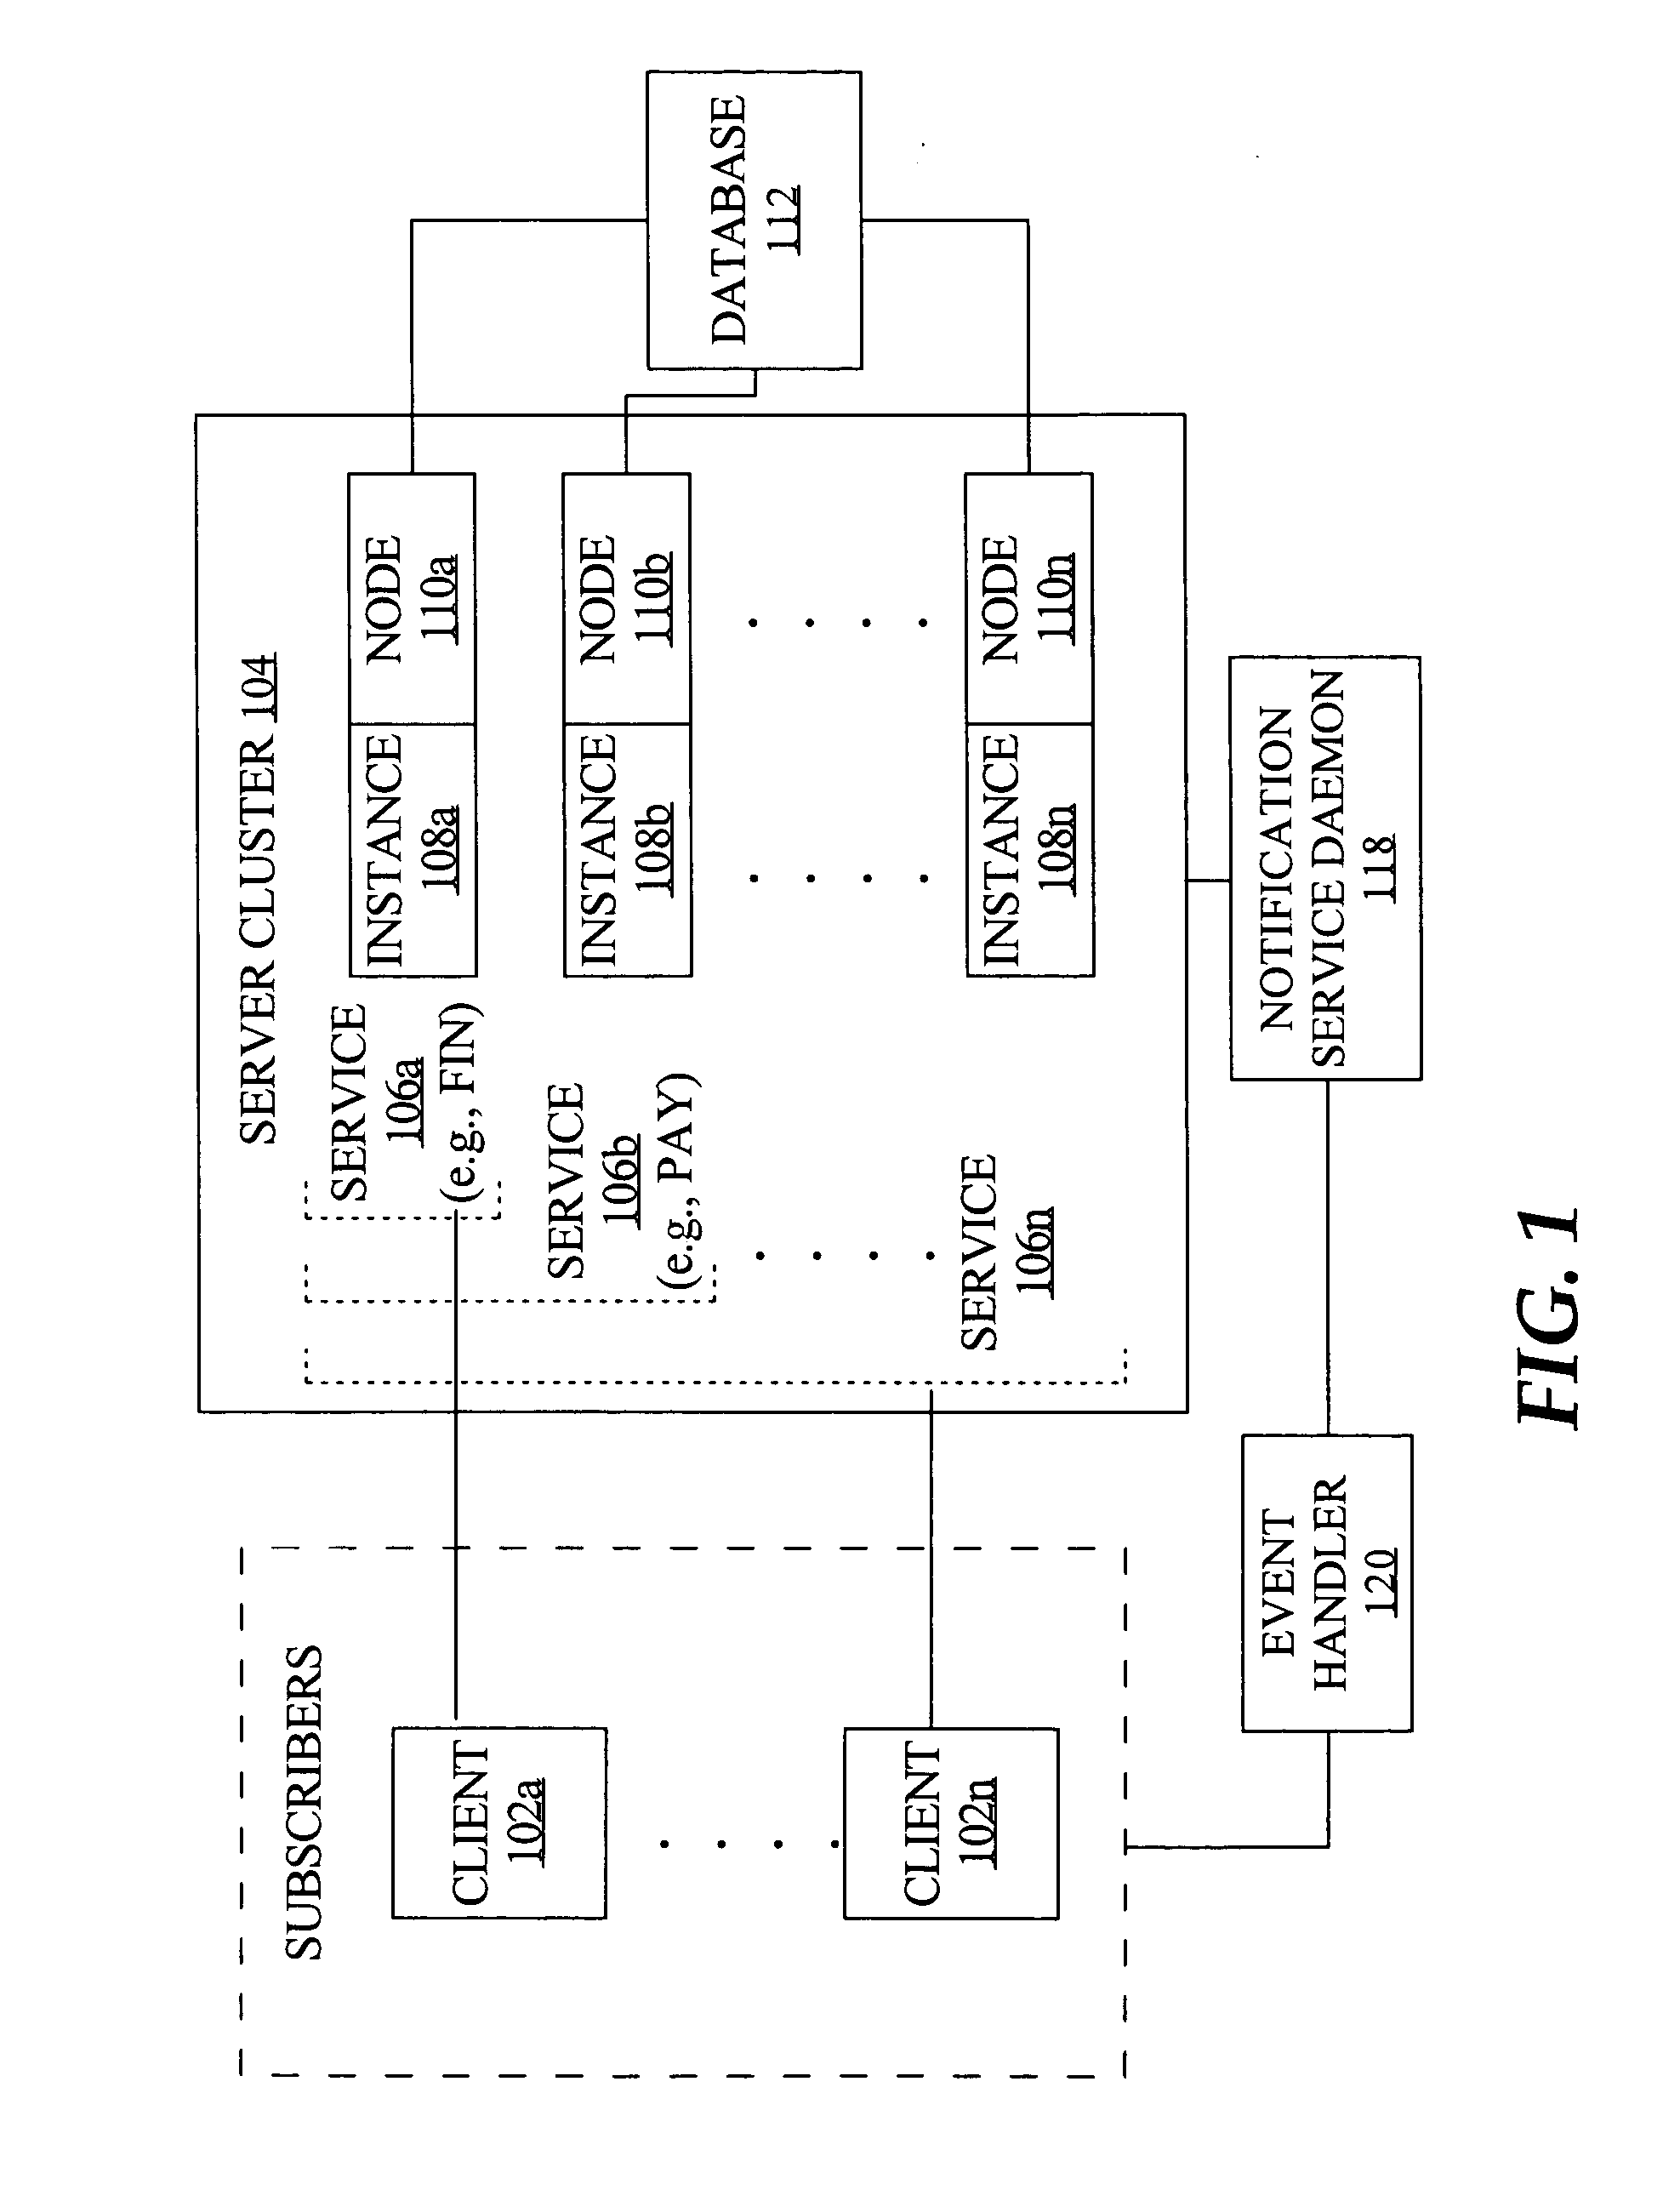 Fast application notification in a clustered computing system